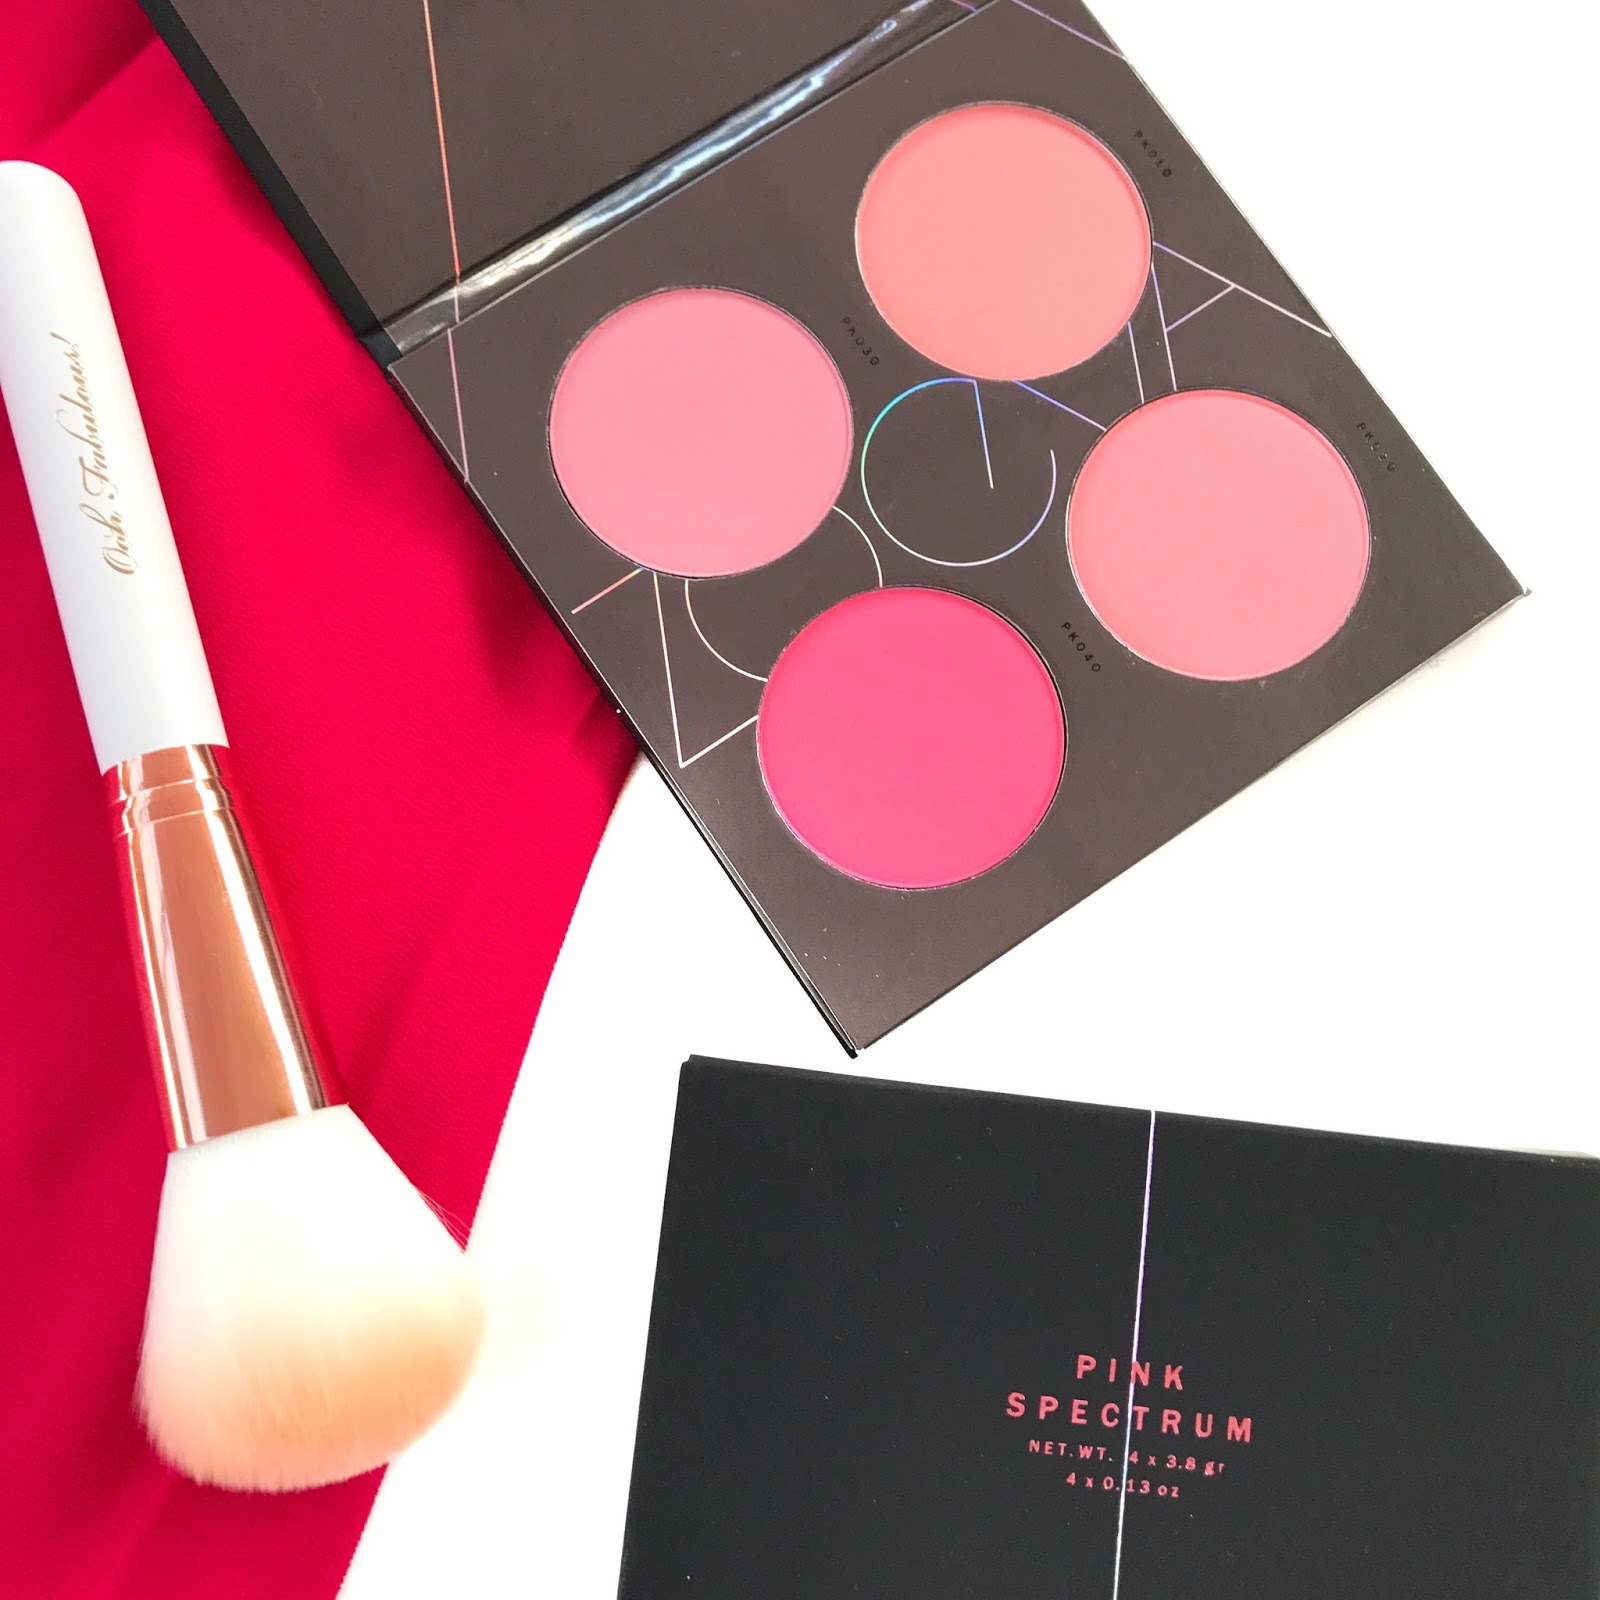 Review and Swatches: Zoeva Pink Spectrum Blush Palette.